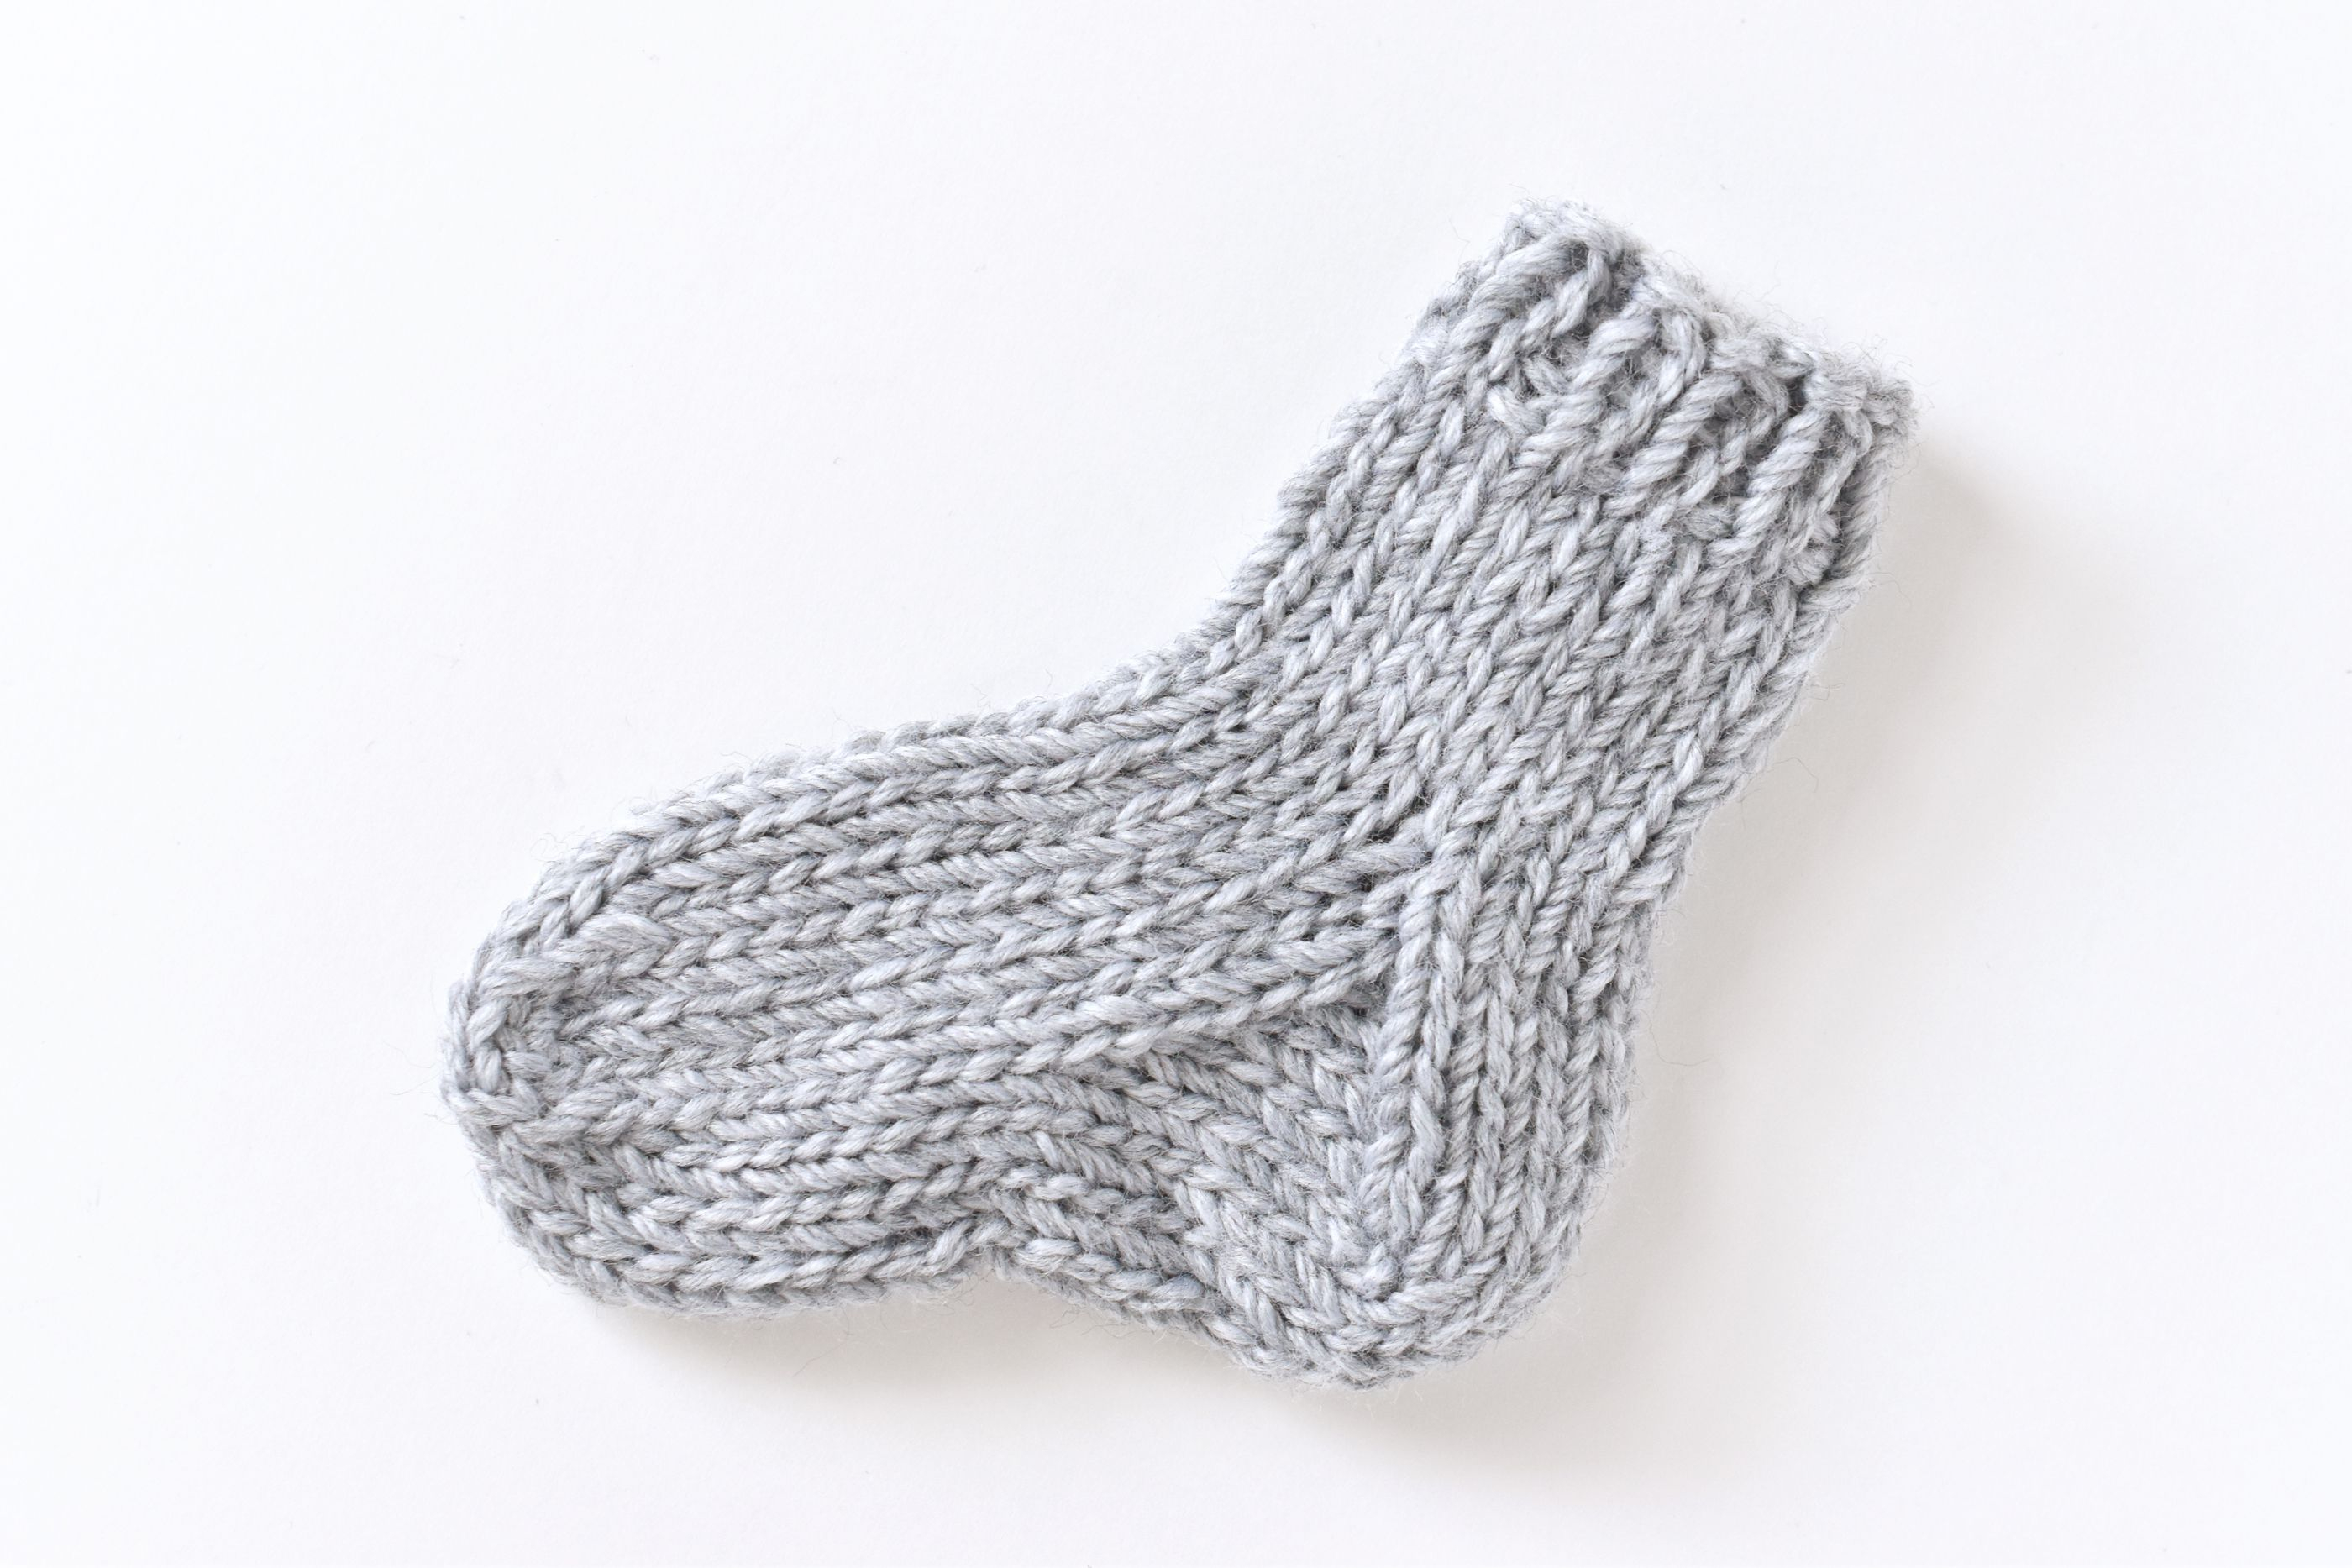 Knitting Sock Patterns For Beginners Knit A Small Sock With A Step Step Practice Pattern